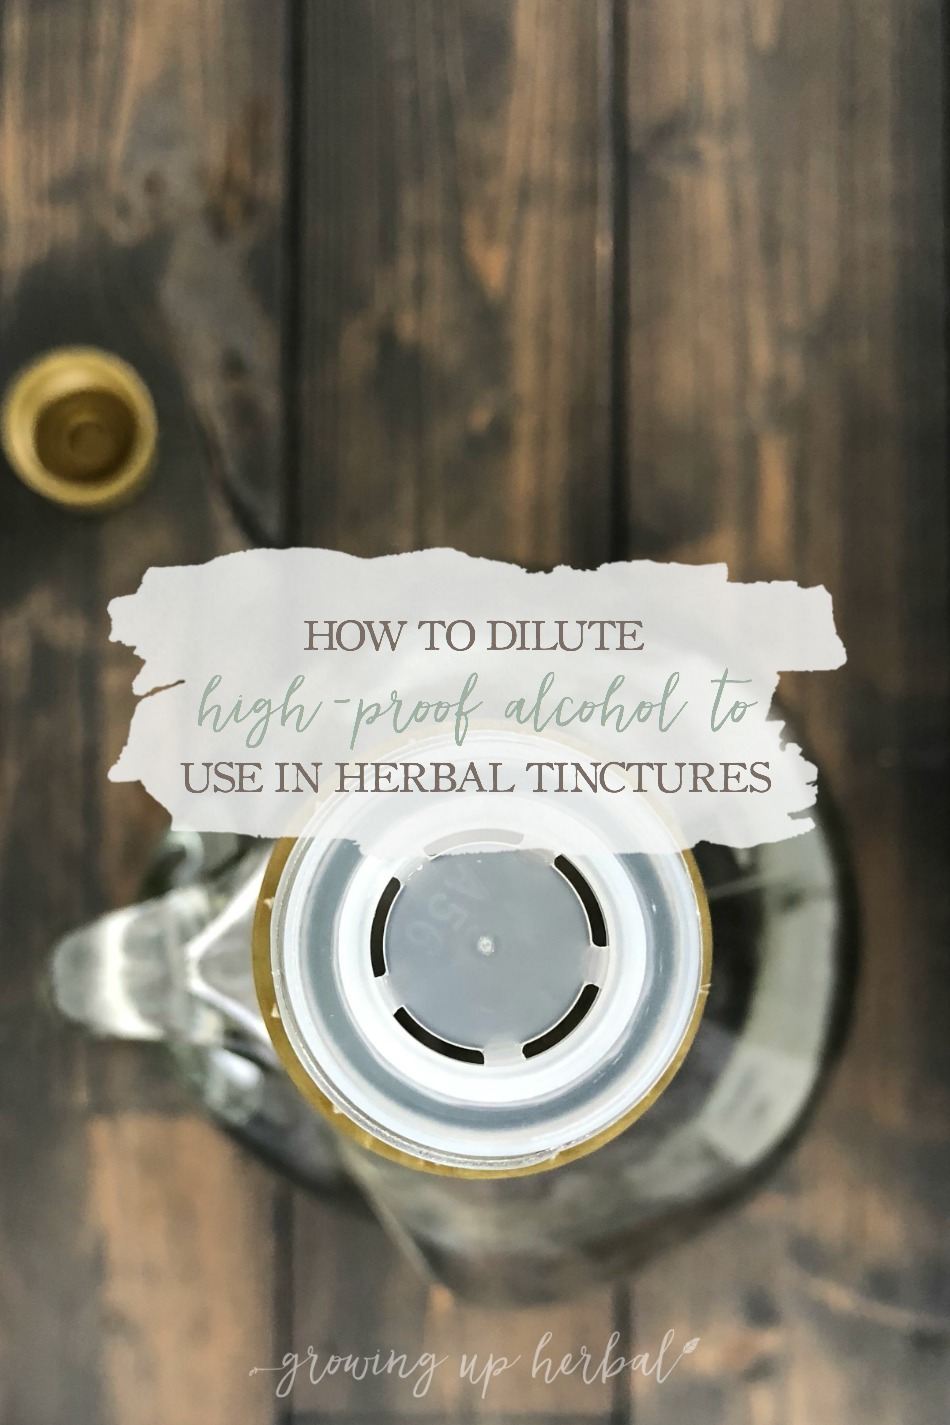 How To Dilute High-Proof Alcohol To Use In Herbal Tinctures | Growing Up Herbal | Out of your favorite tincture-making alcohol? Here’s how to dilute high-proof alcohol for tinctures instead!